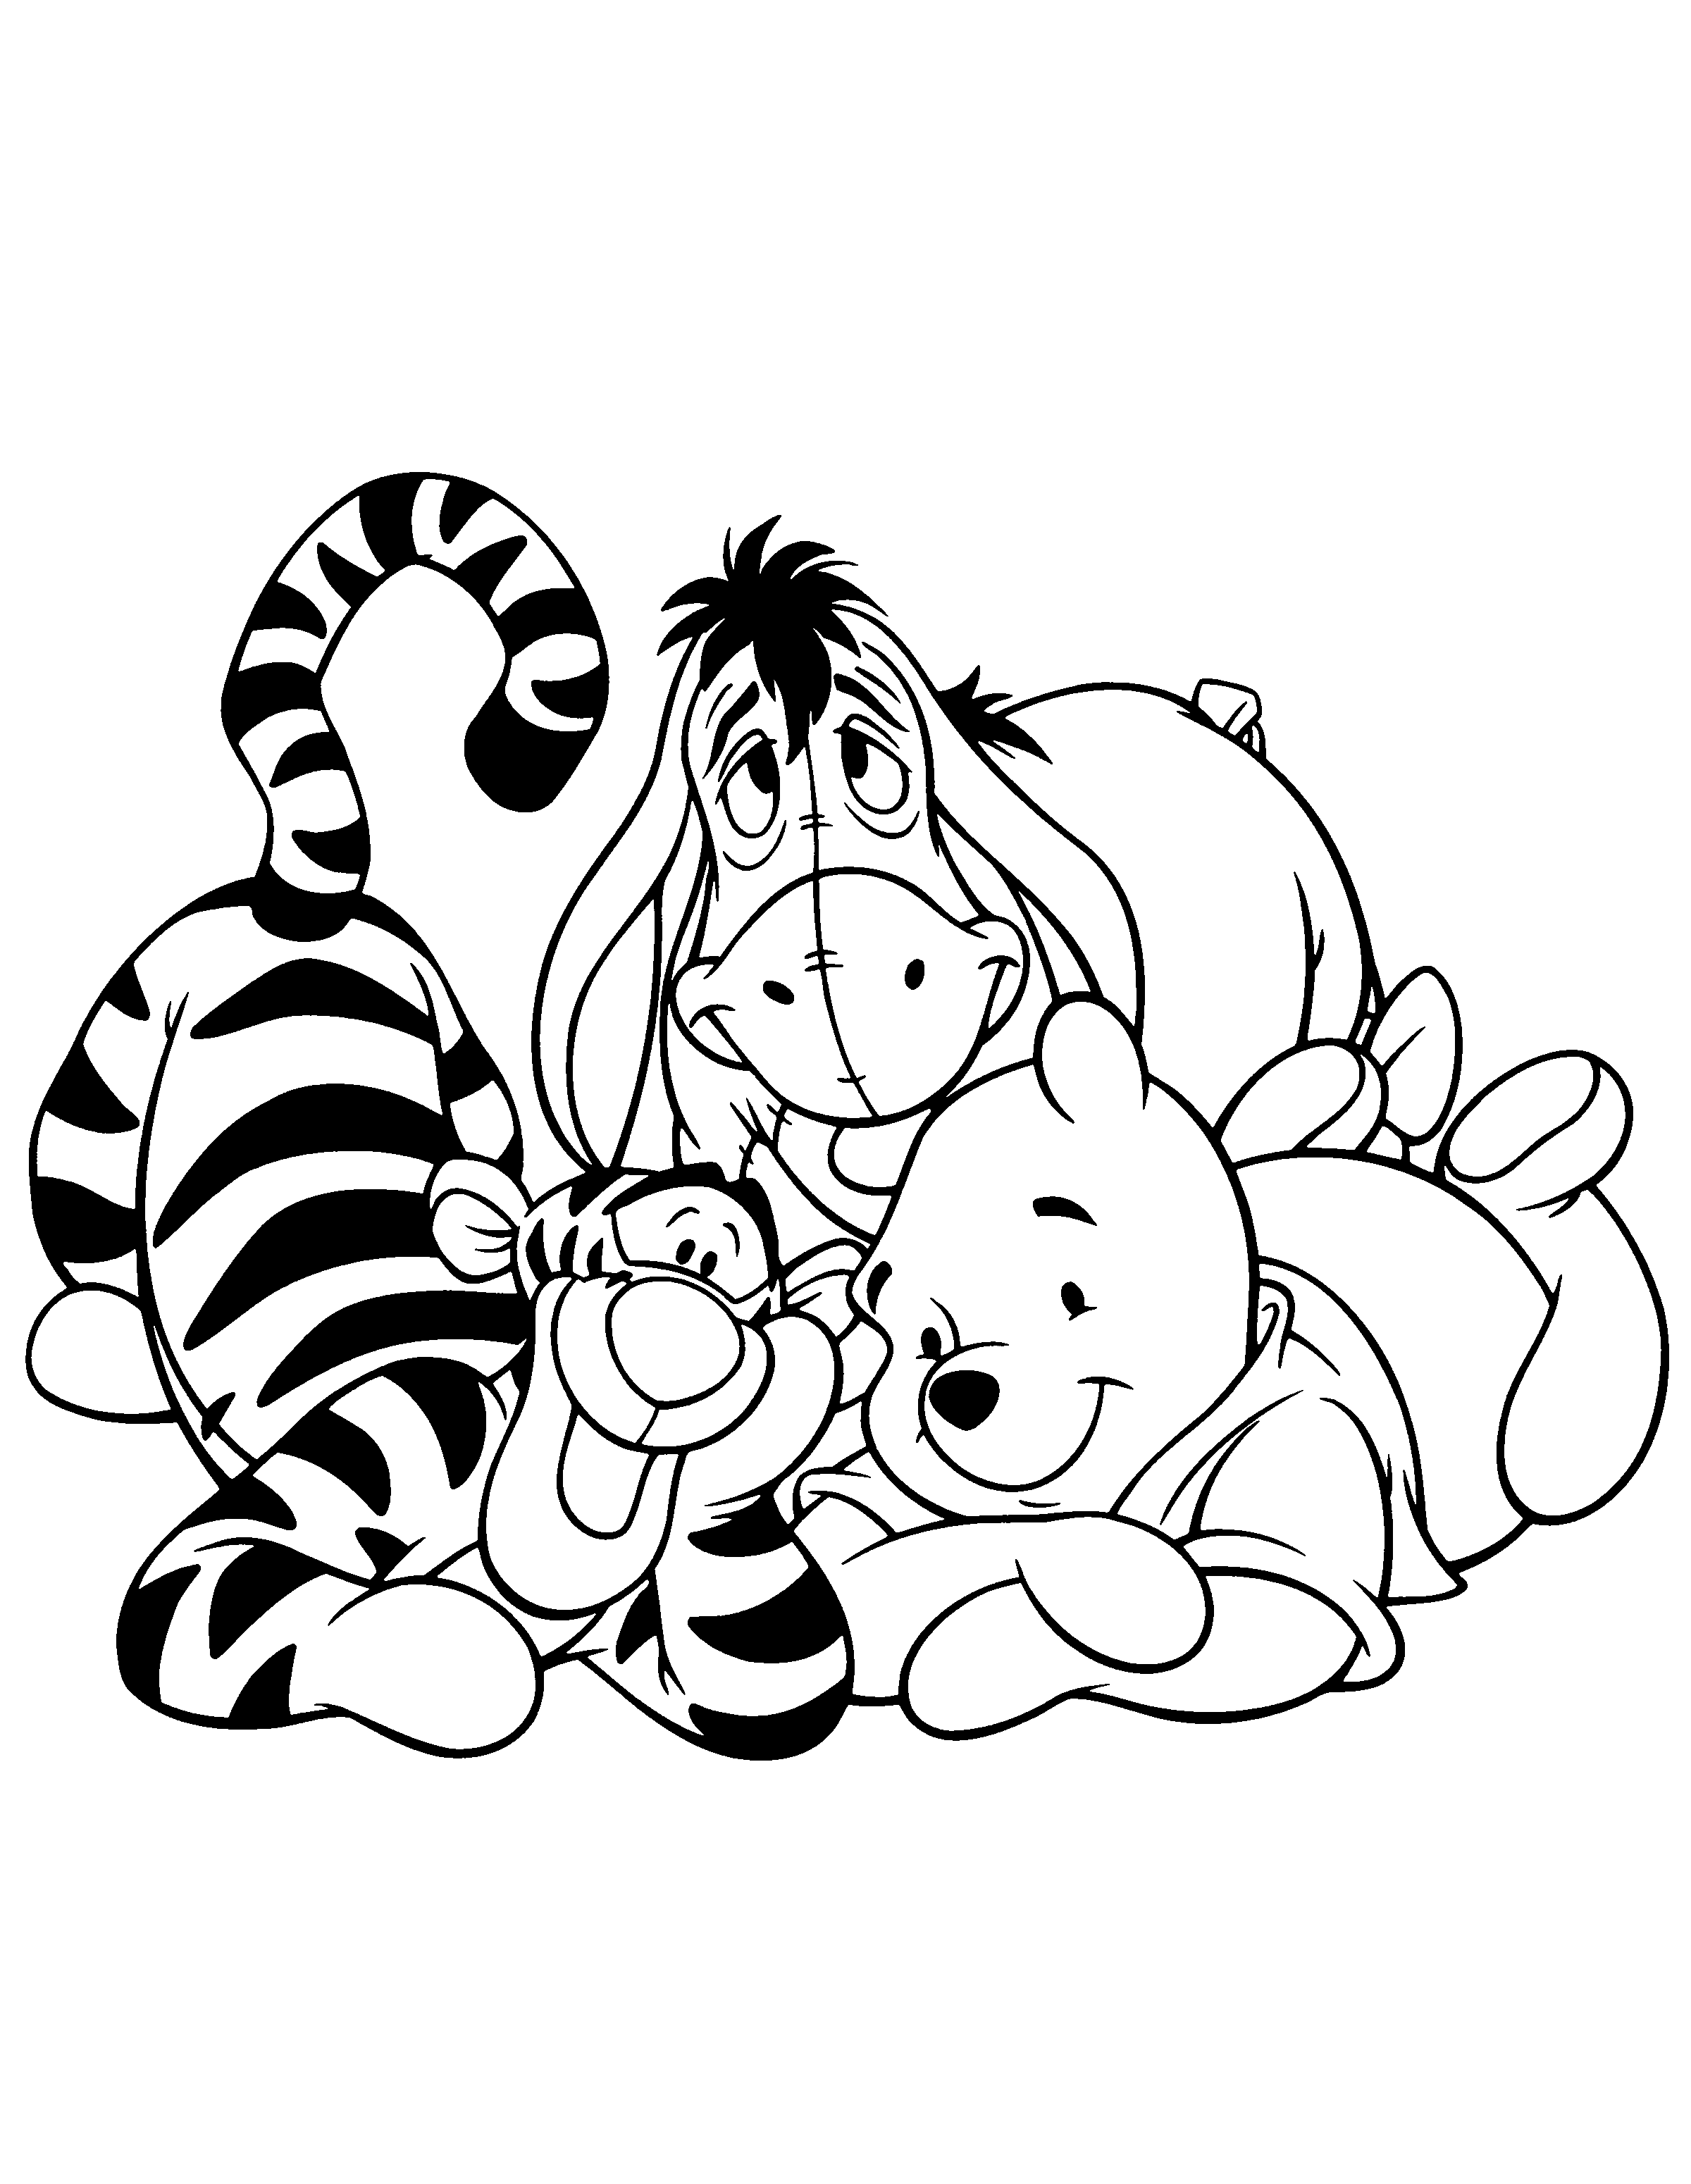 Winnie the Pooh Coloring Page Printable